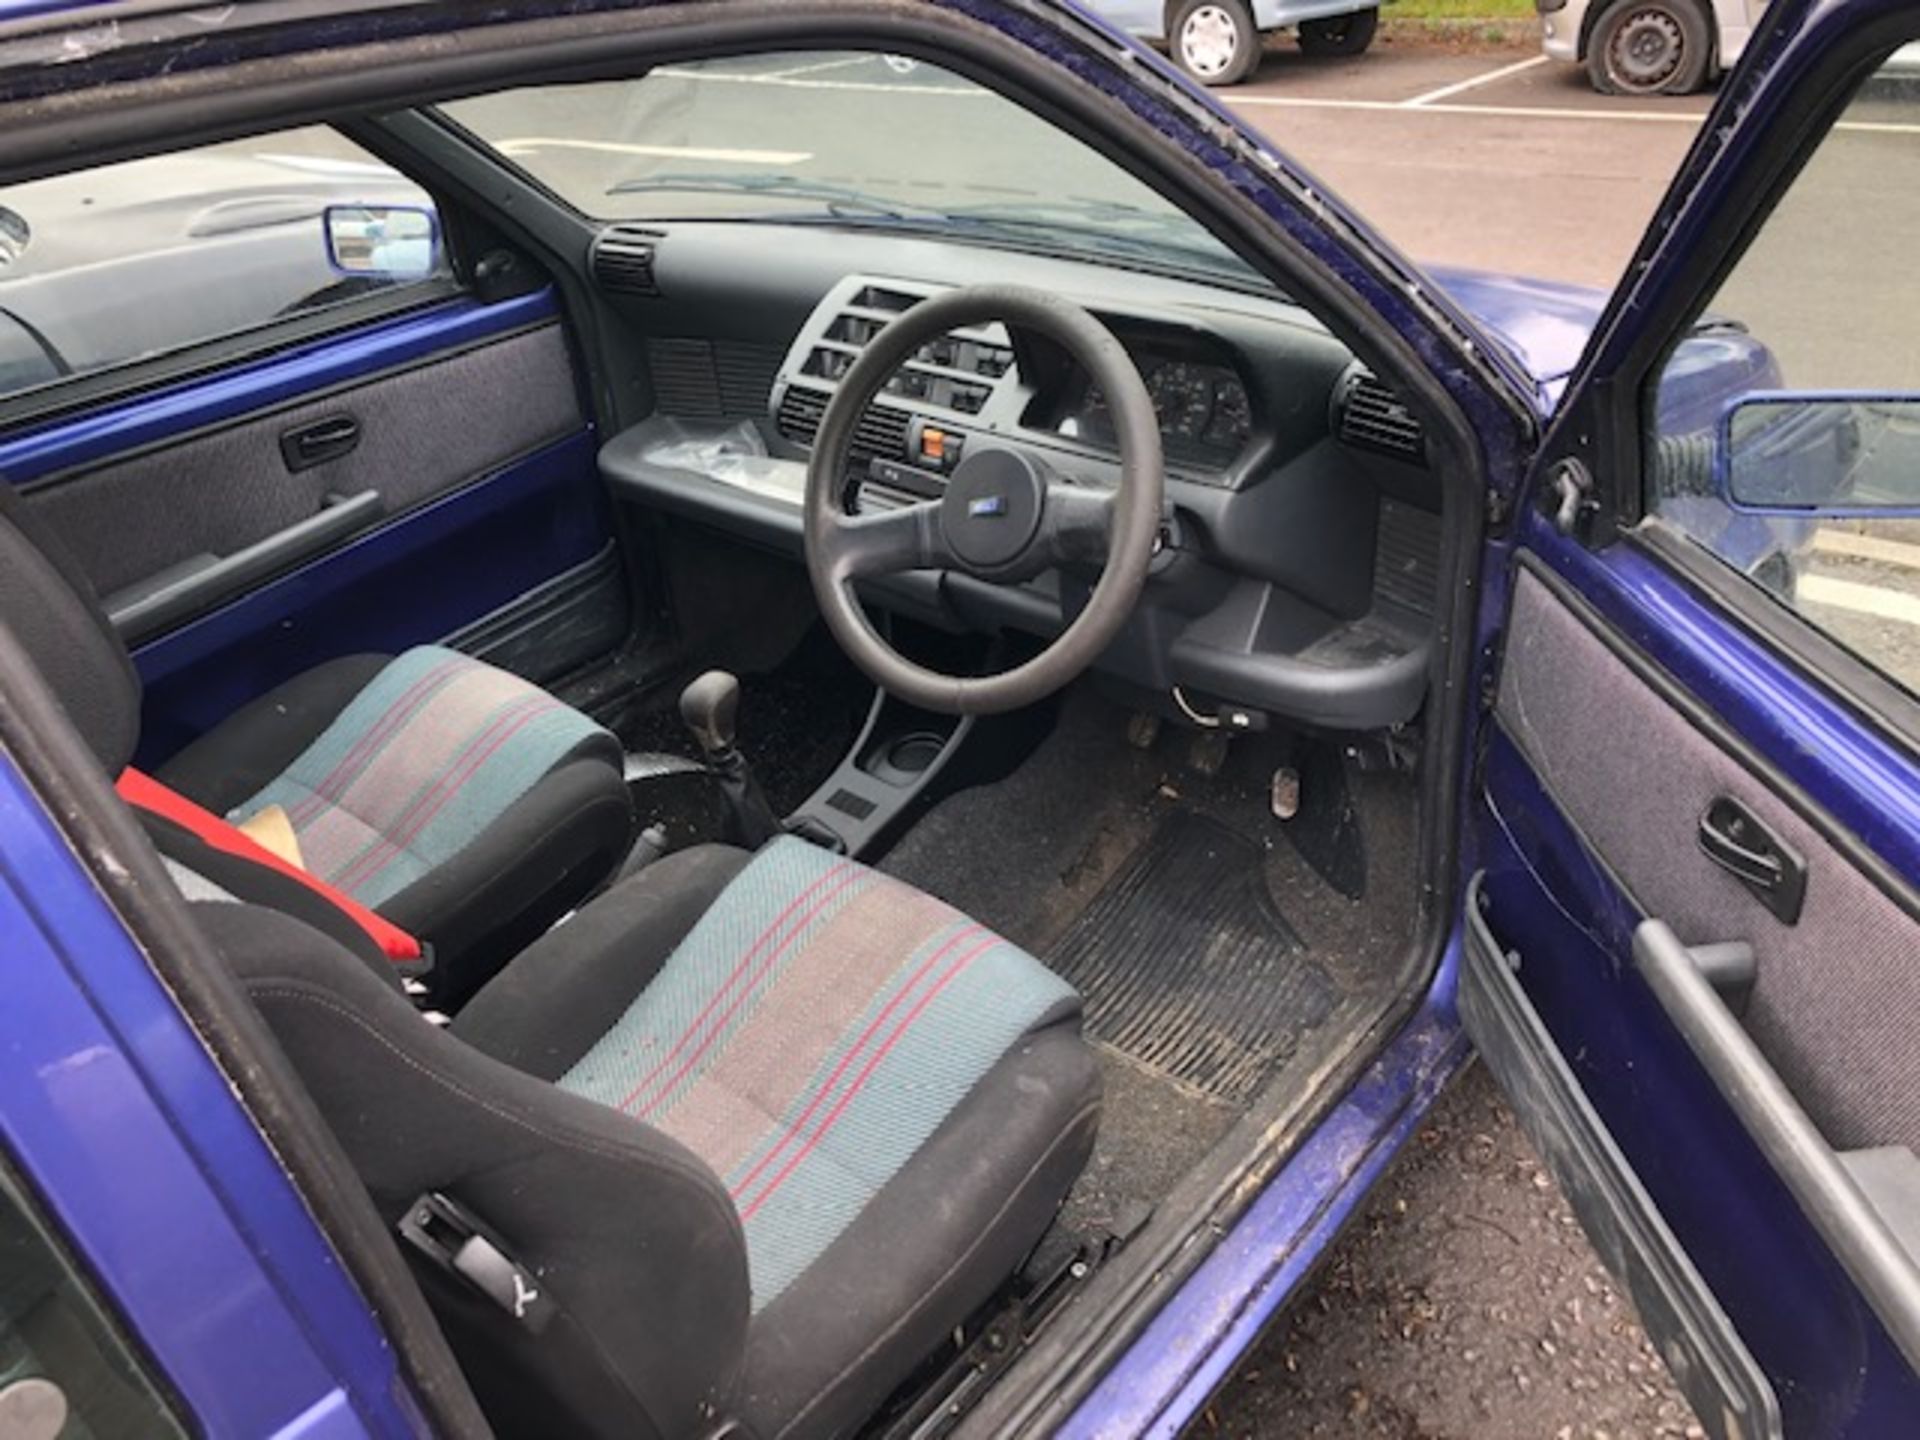 Fiat Cinquecento Reg No R118 WND 2 door in blue. We have V5 and keys, this vehicle started very - Image 5 of 6